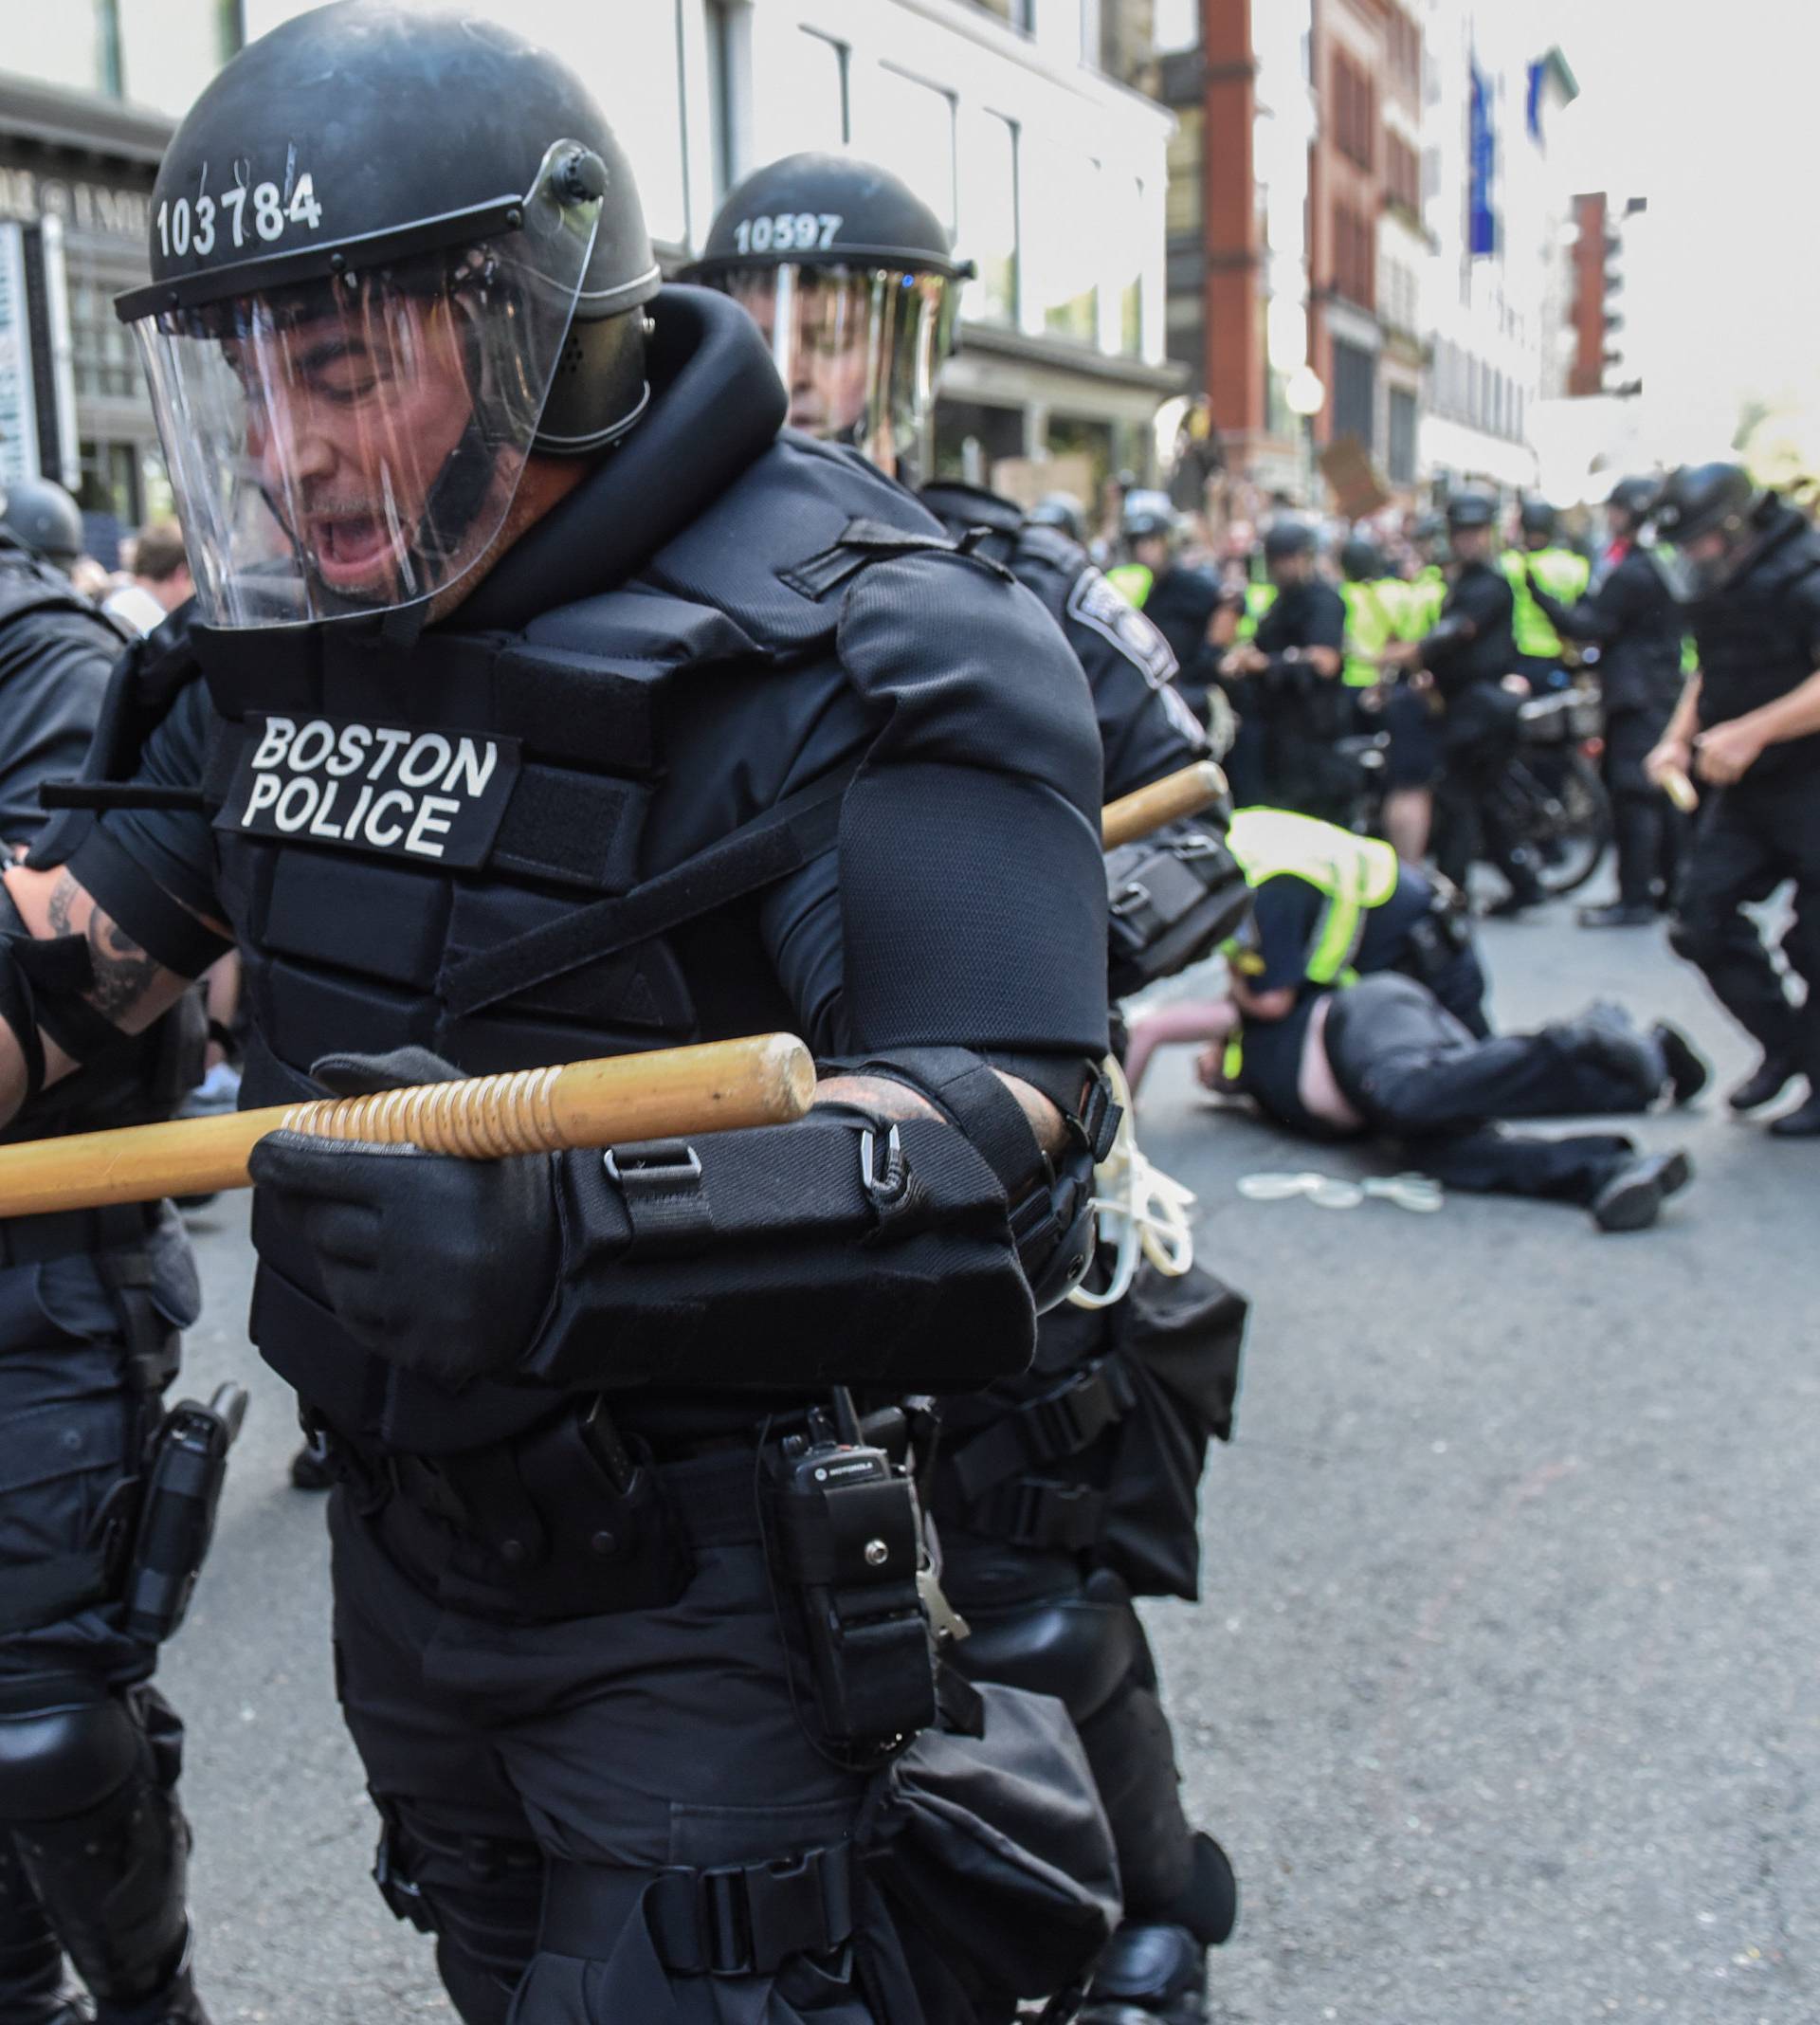 Boston Police officers react as a crowd of counter protesters clashes with them outside of the Boston Commons and the Boston Free Speech Rally in Boston, Massachusetts